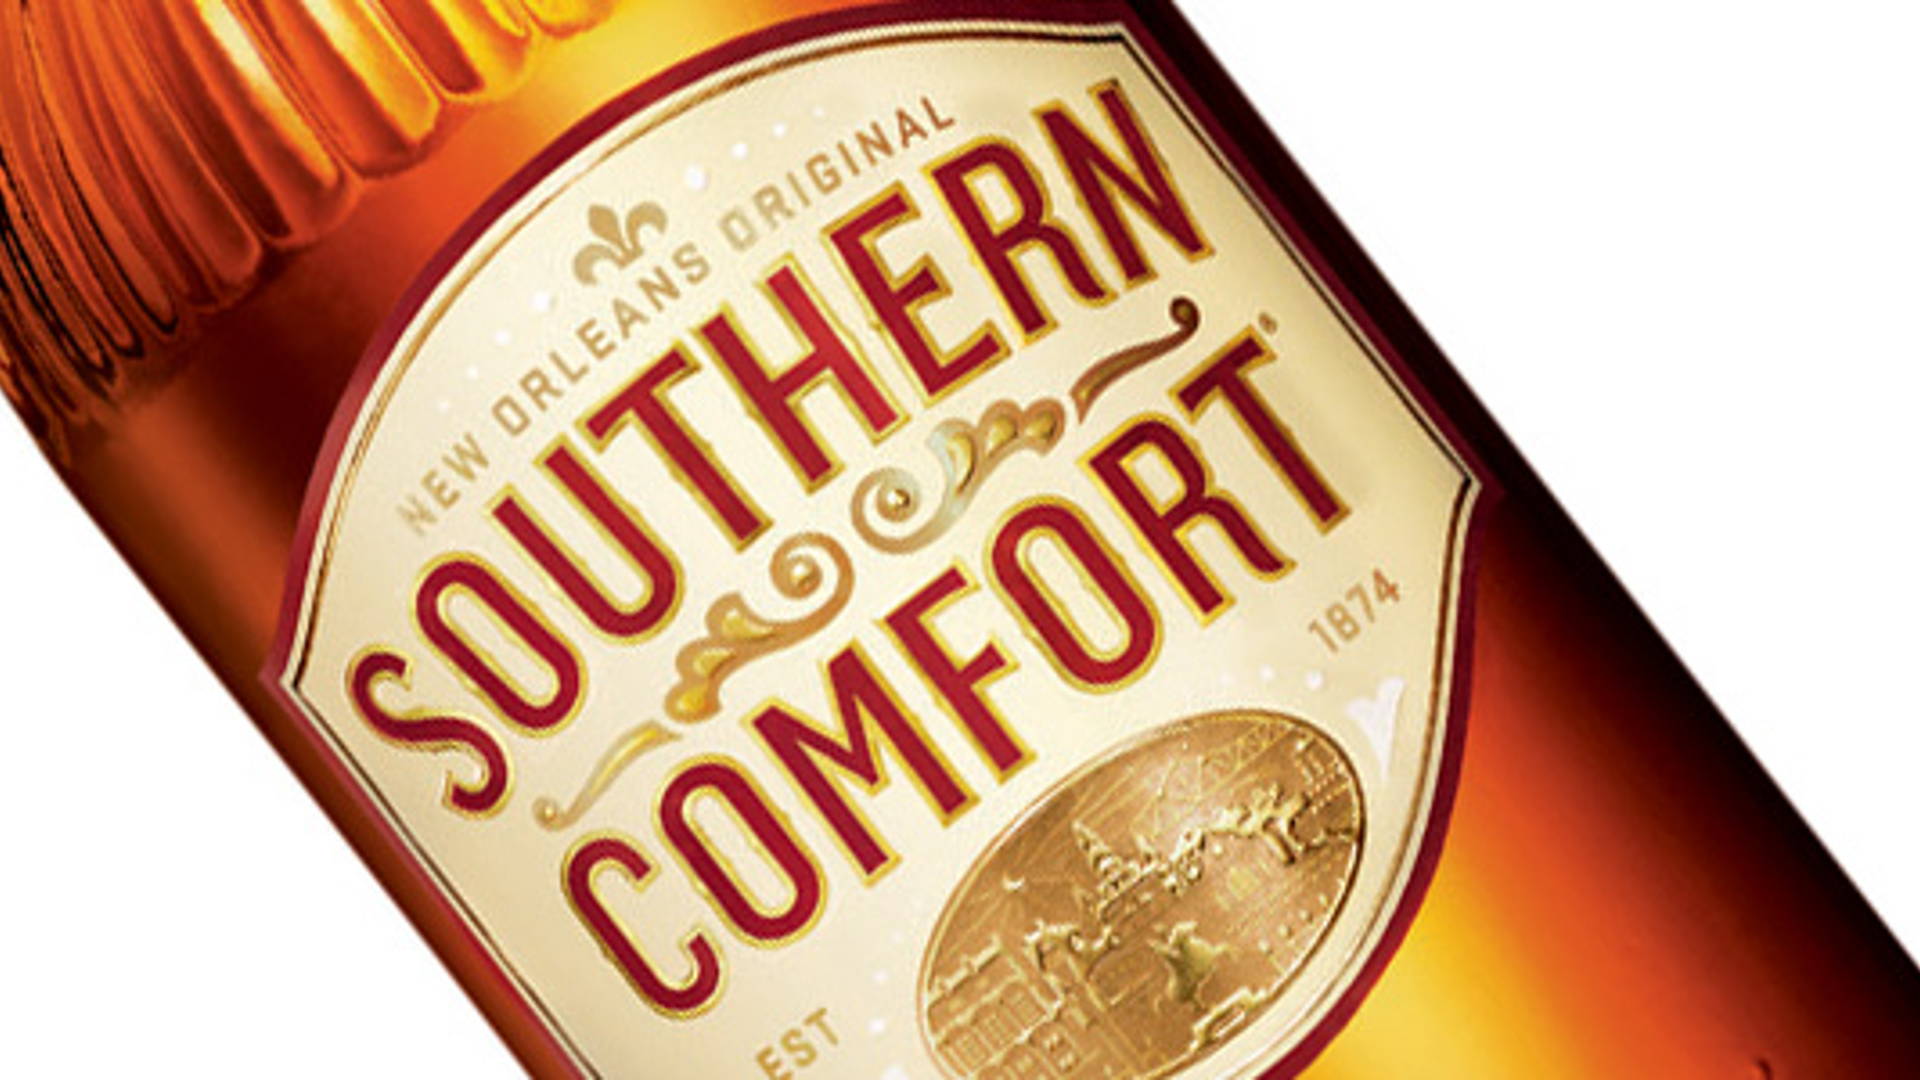 Featured image for Before & After: Southern Comfort Rebranding